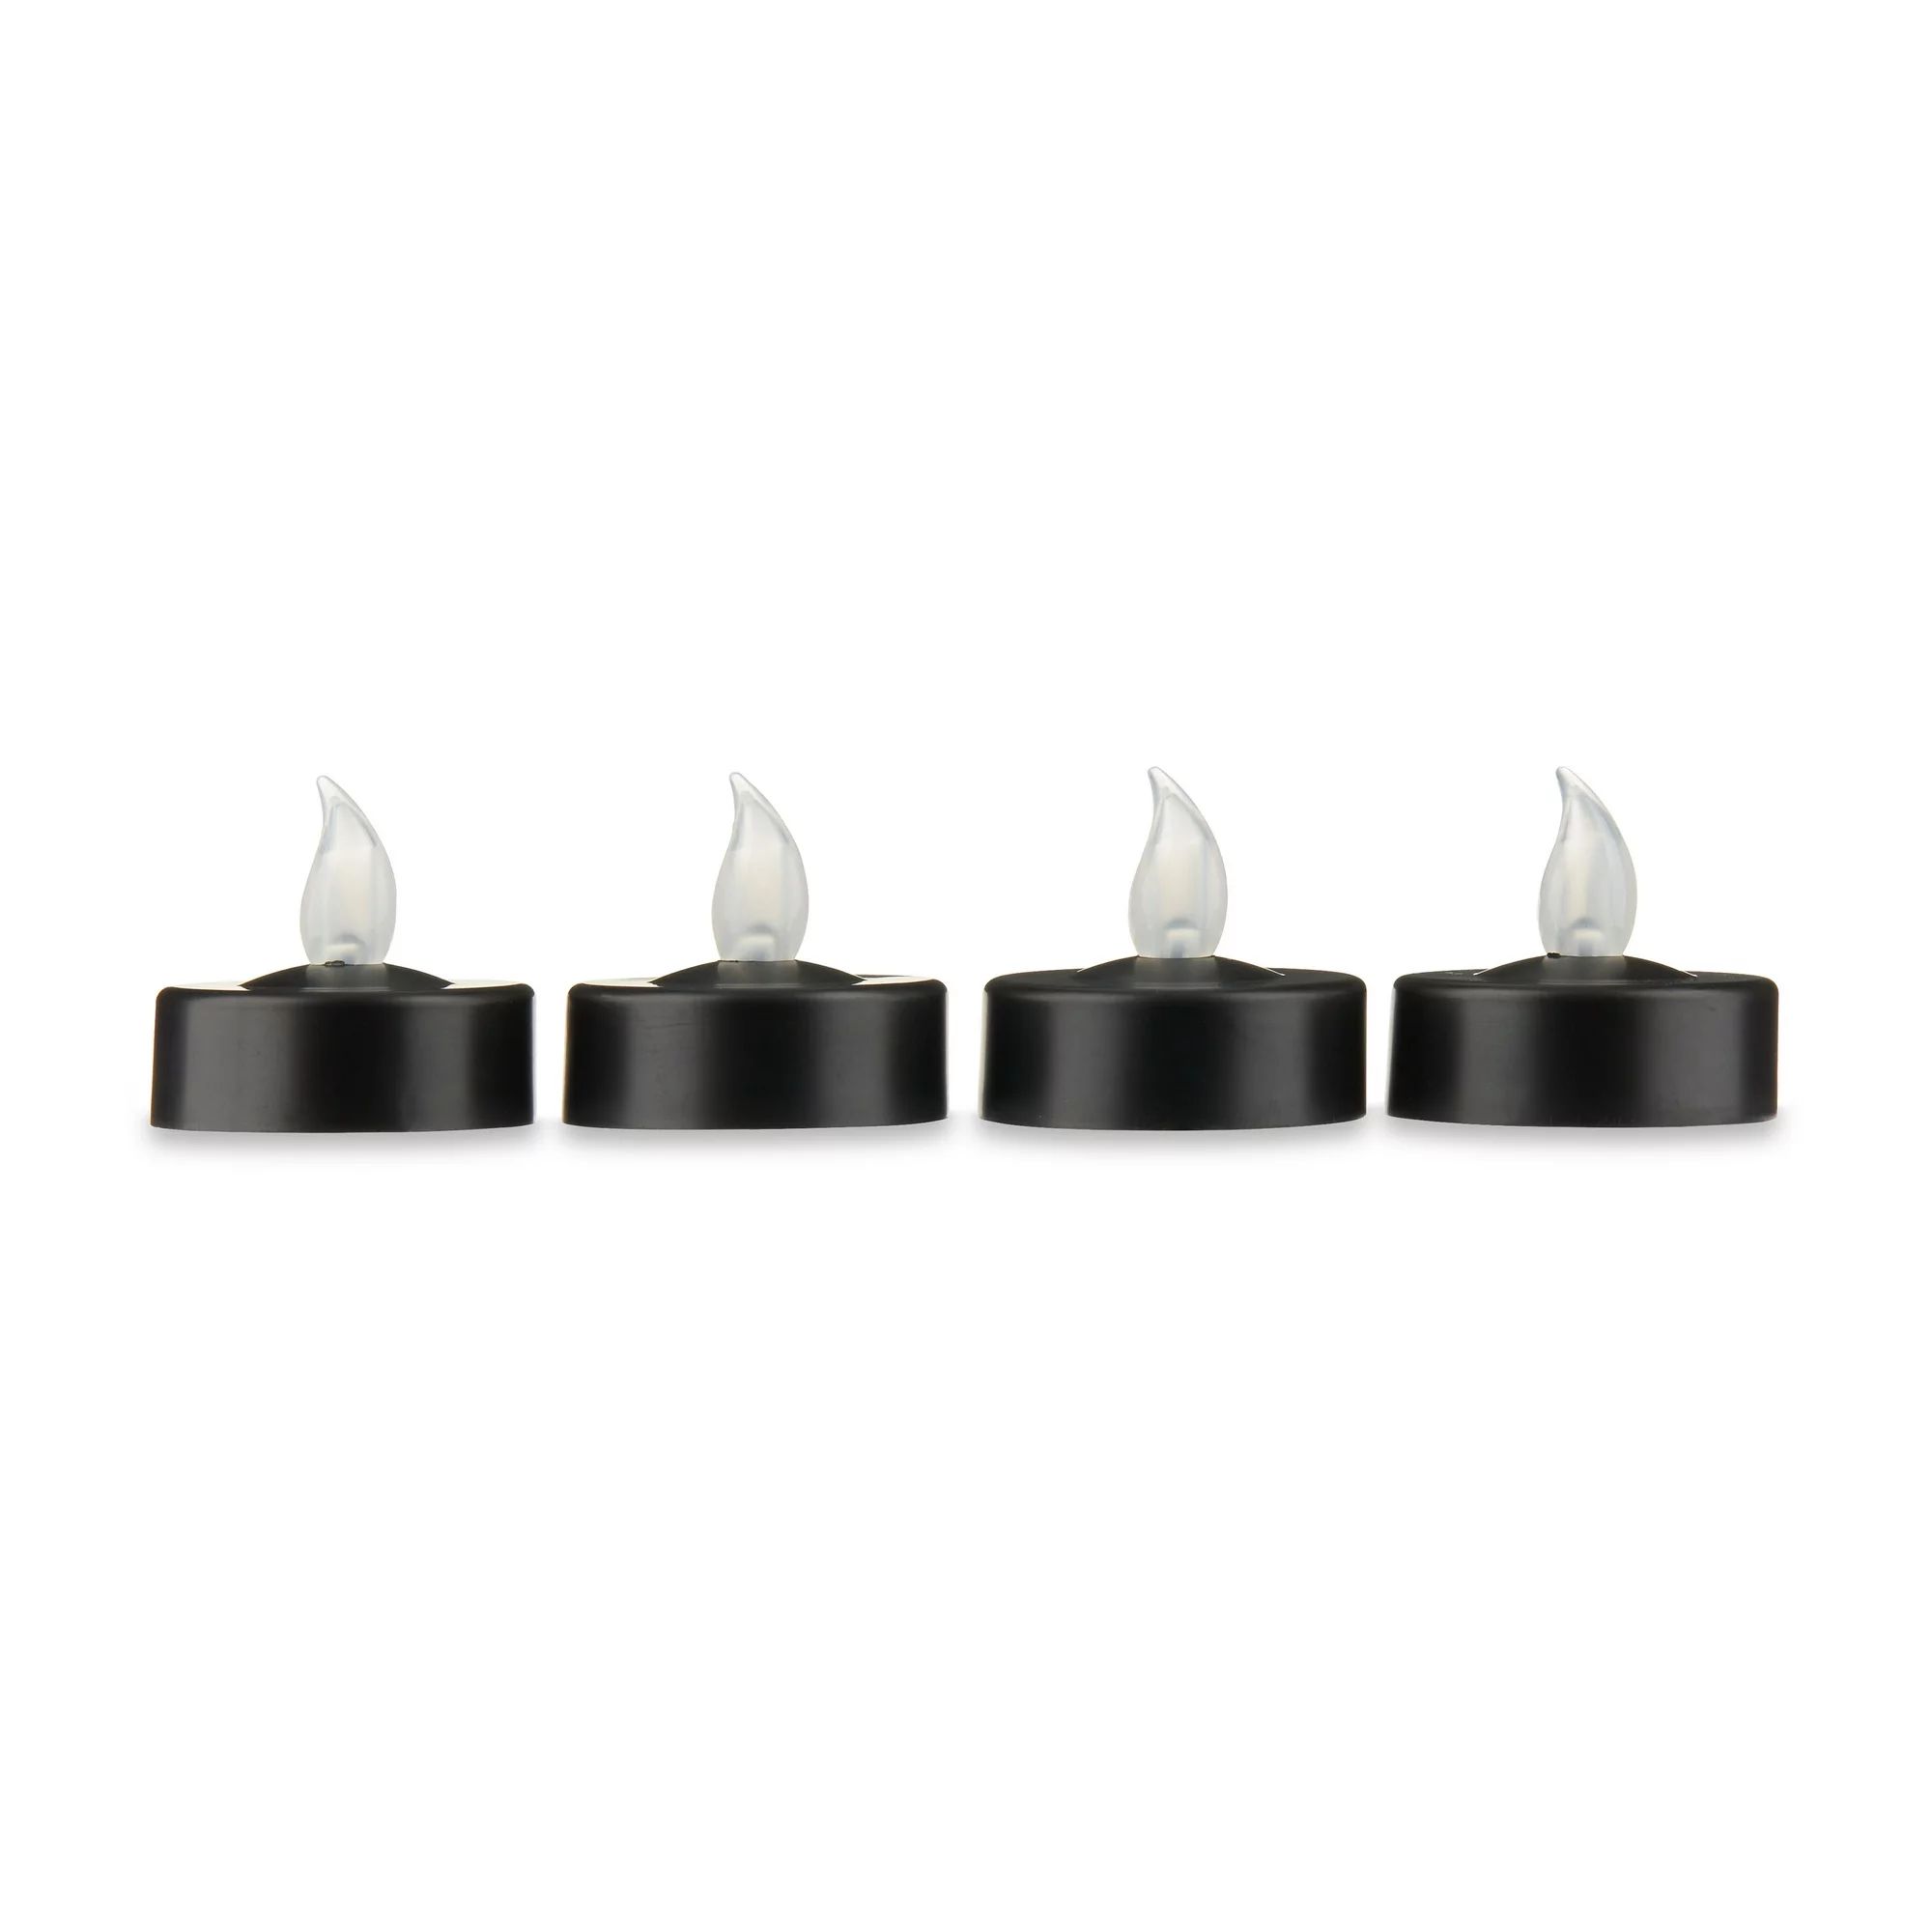 Halloween Flameless Black LED Tealight Candles, 4 Count, Way To Celebrate | Walmart (US)